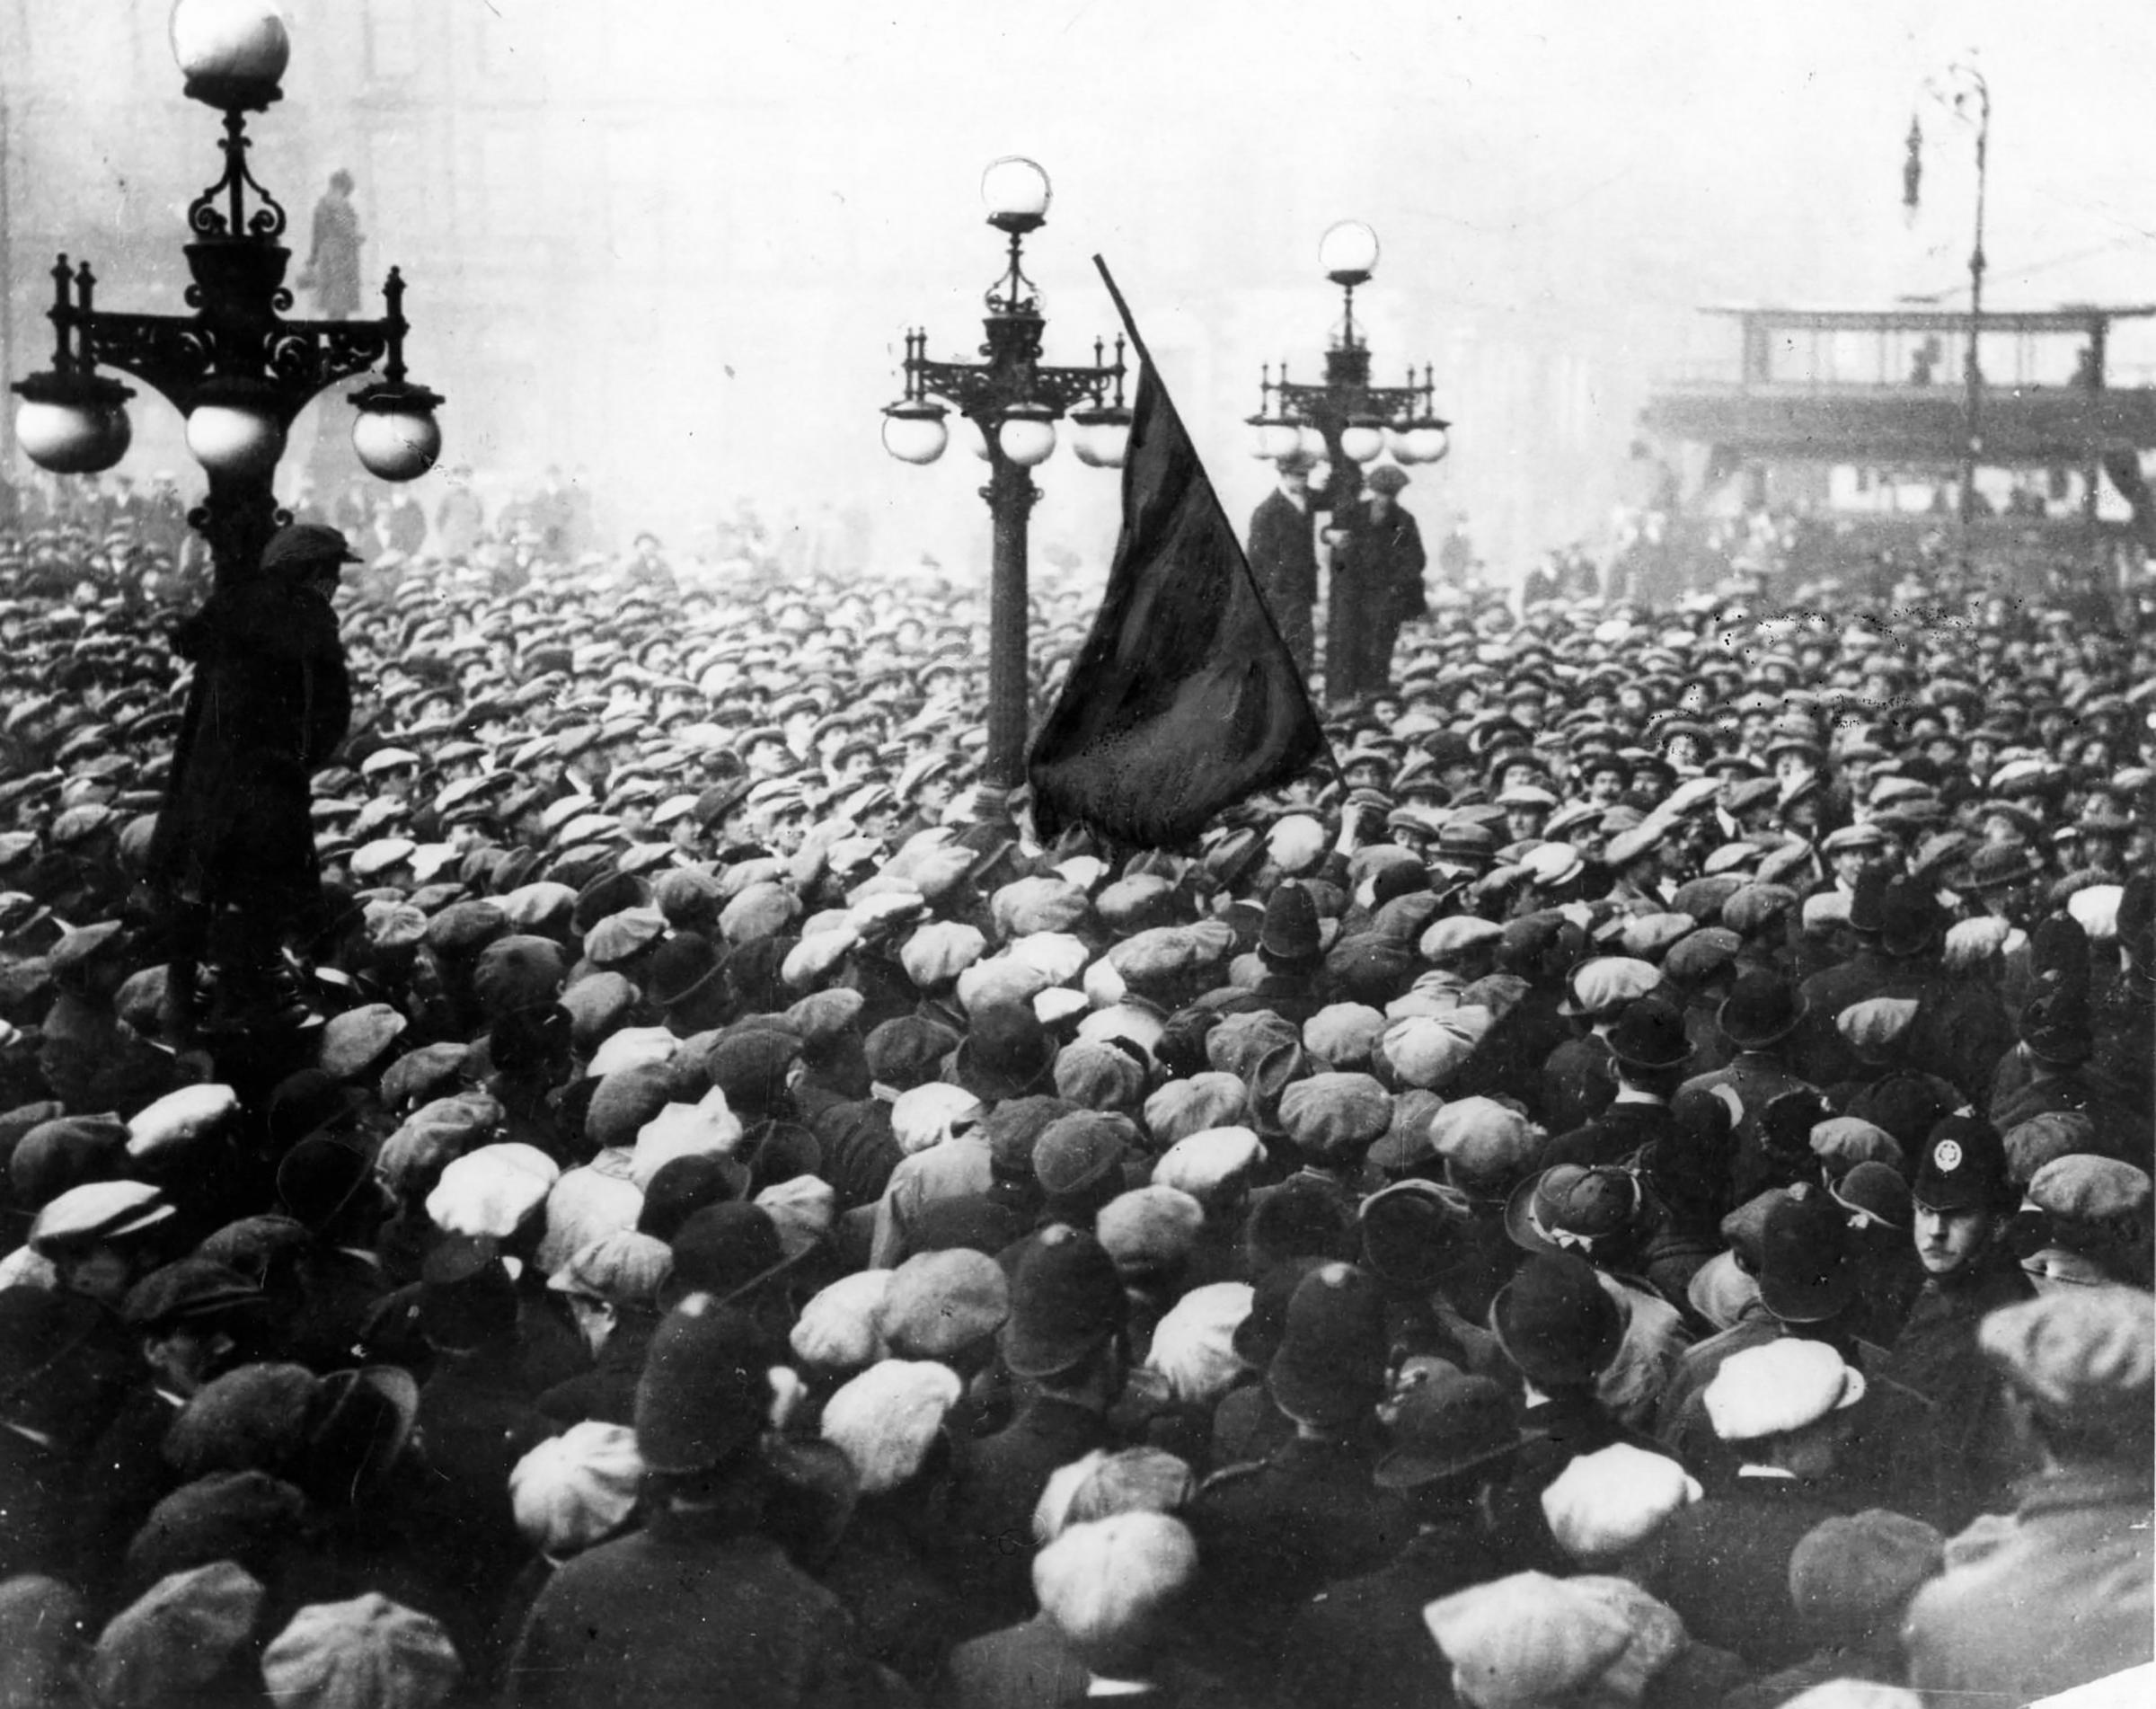 The raising of the red flag in George Square in 1919.